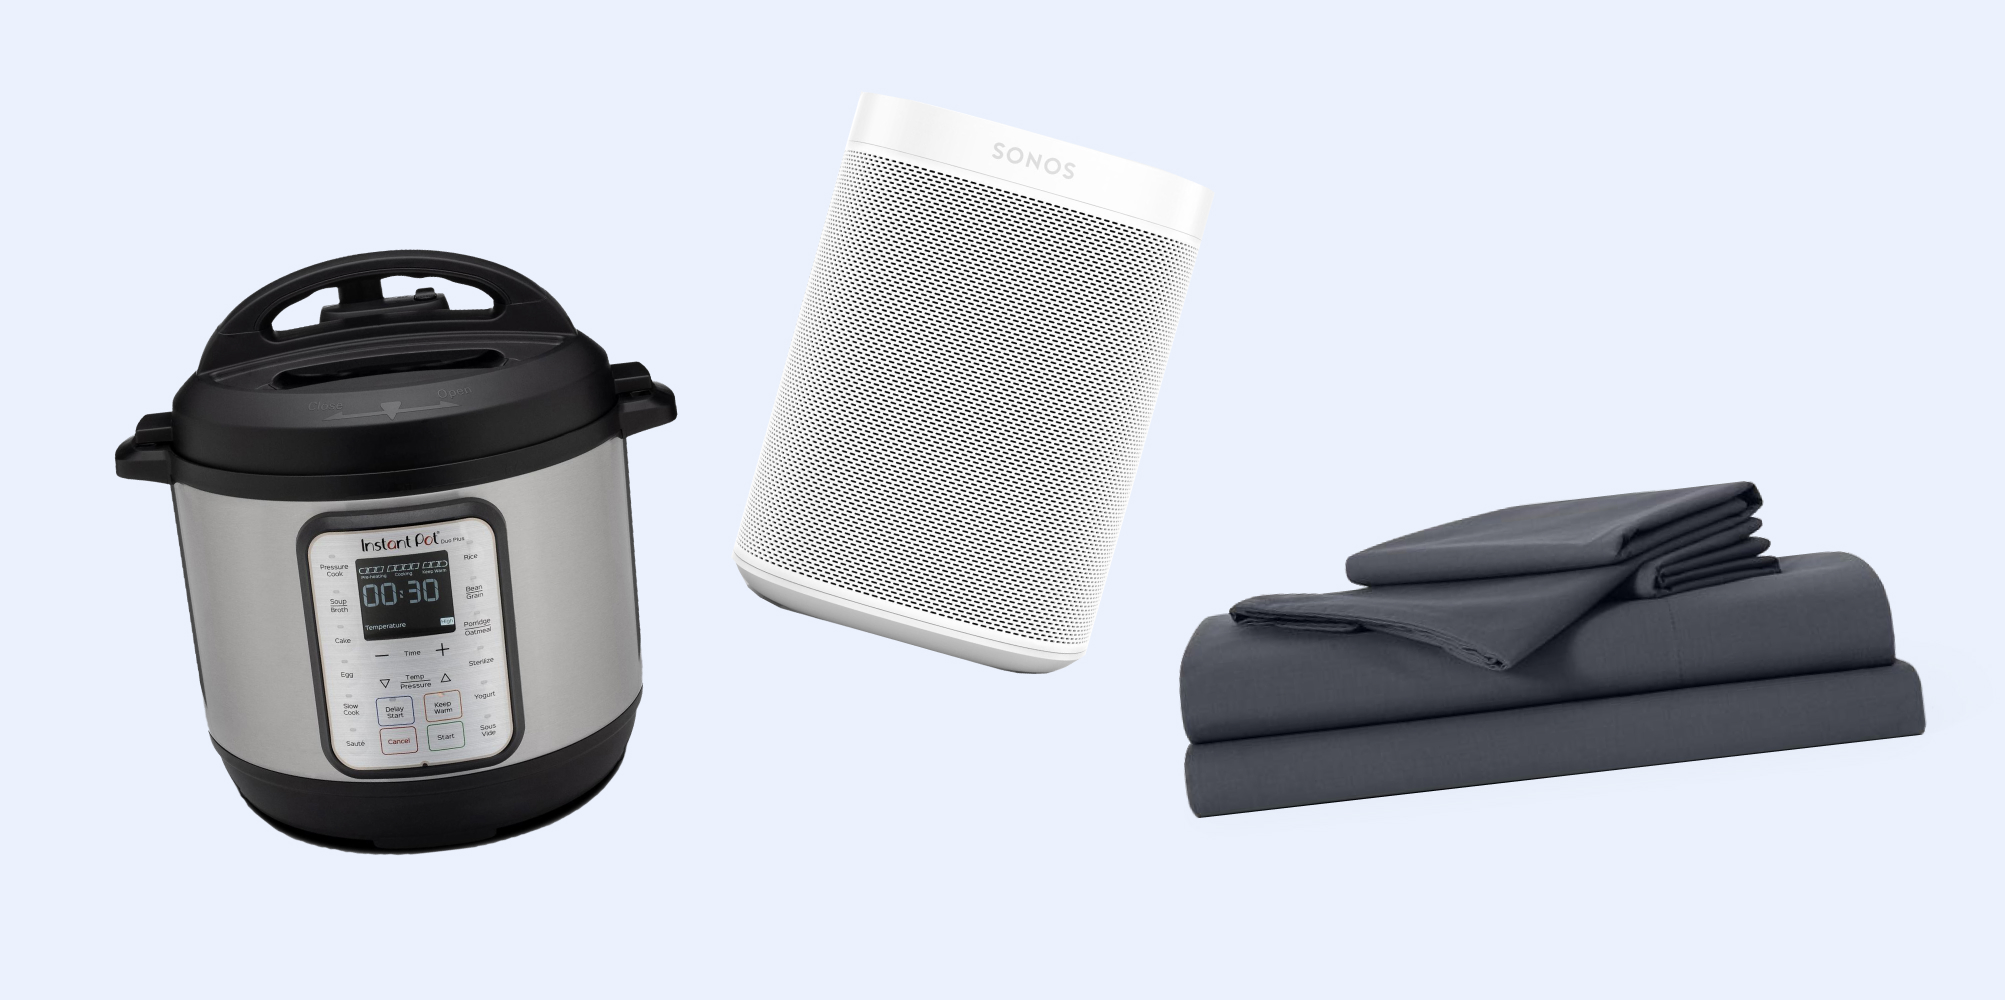 Instant Pot Duo Plus Pressure Cooker | Luxe Sateen 4-Piece Core Sheet Set | One SL: The Essential Home Speaker